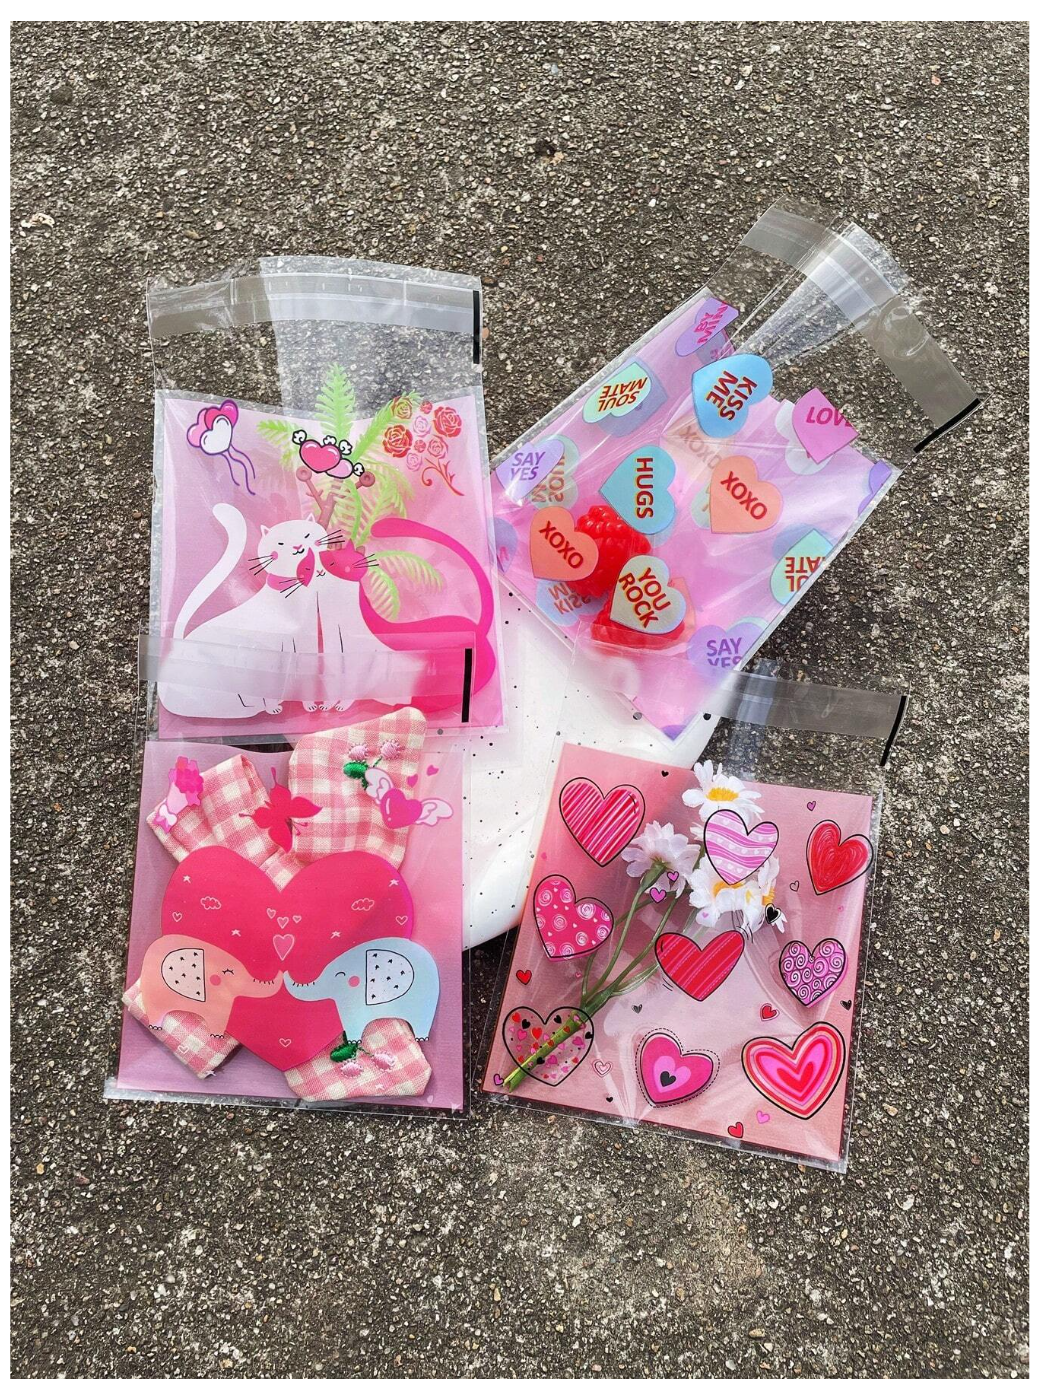 Whimsical Love Packages: 100pcs Romantic Pink Heart Printed Self-Sealing Opp Bags with Cute Pink Elephant & Cat Print – Ideal for Couples, Weddings, and Valentine's Day Celebrations!